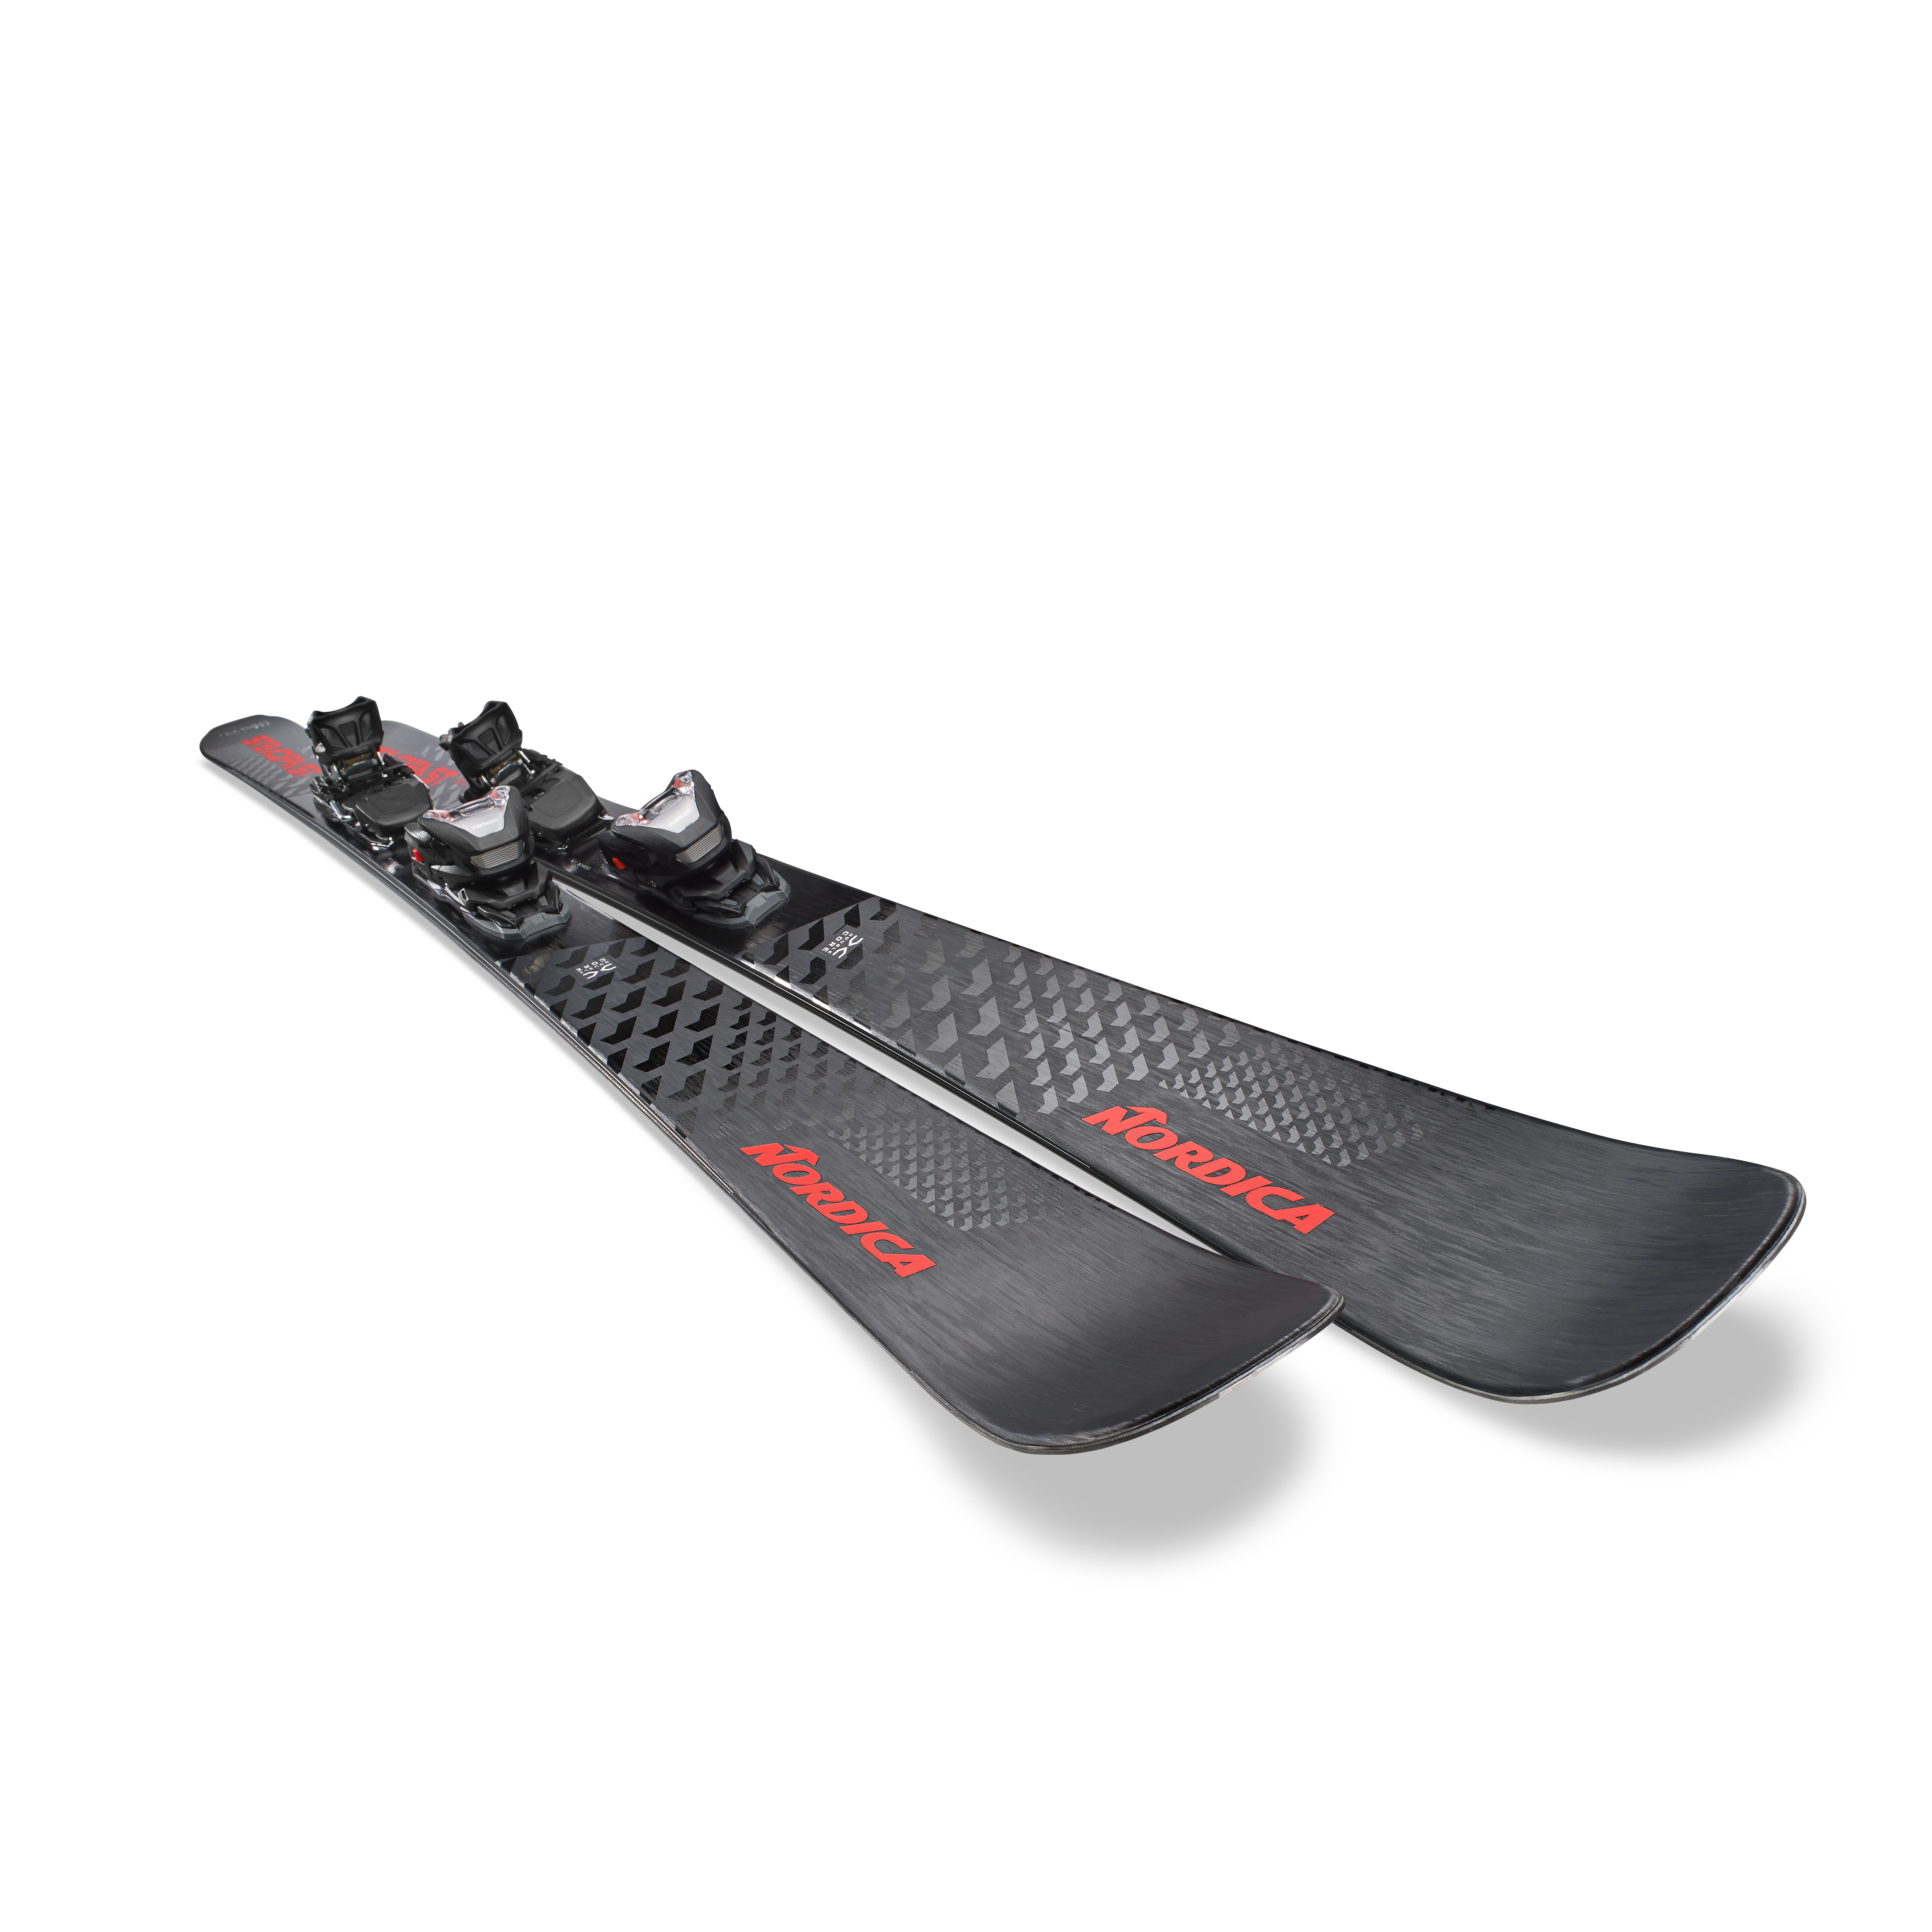 Picture of the Nordica Steadfast 85 dc fdt skis.